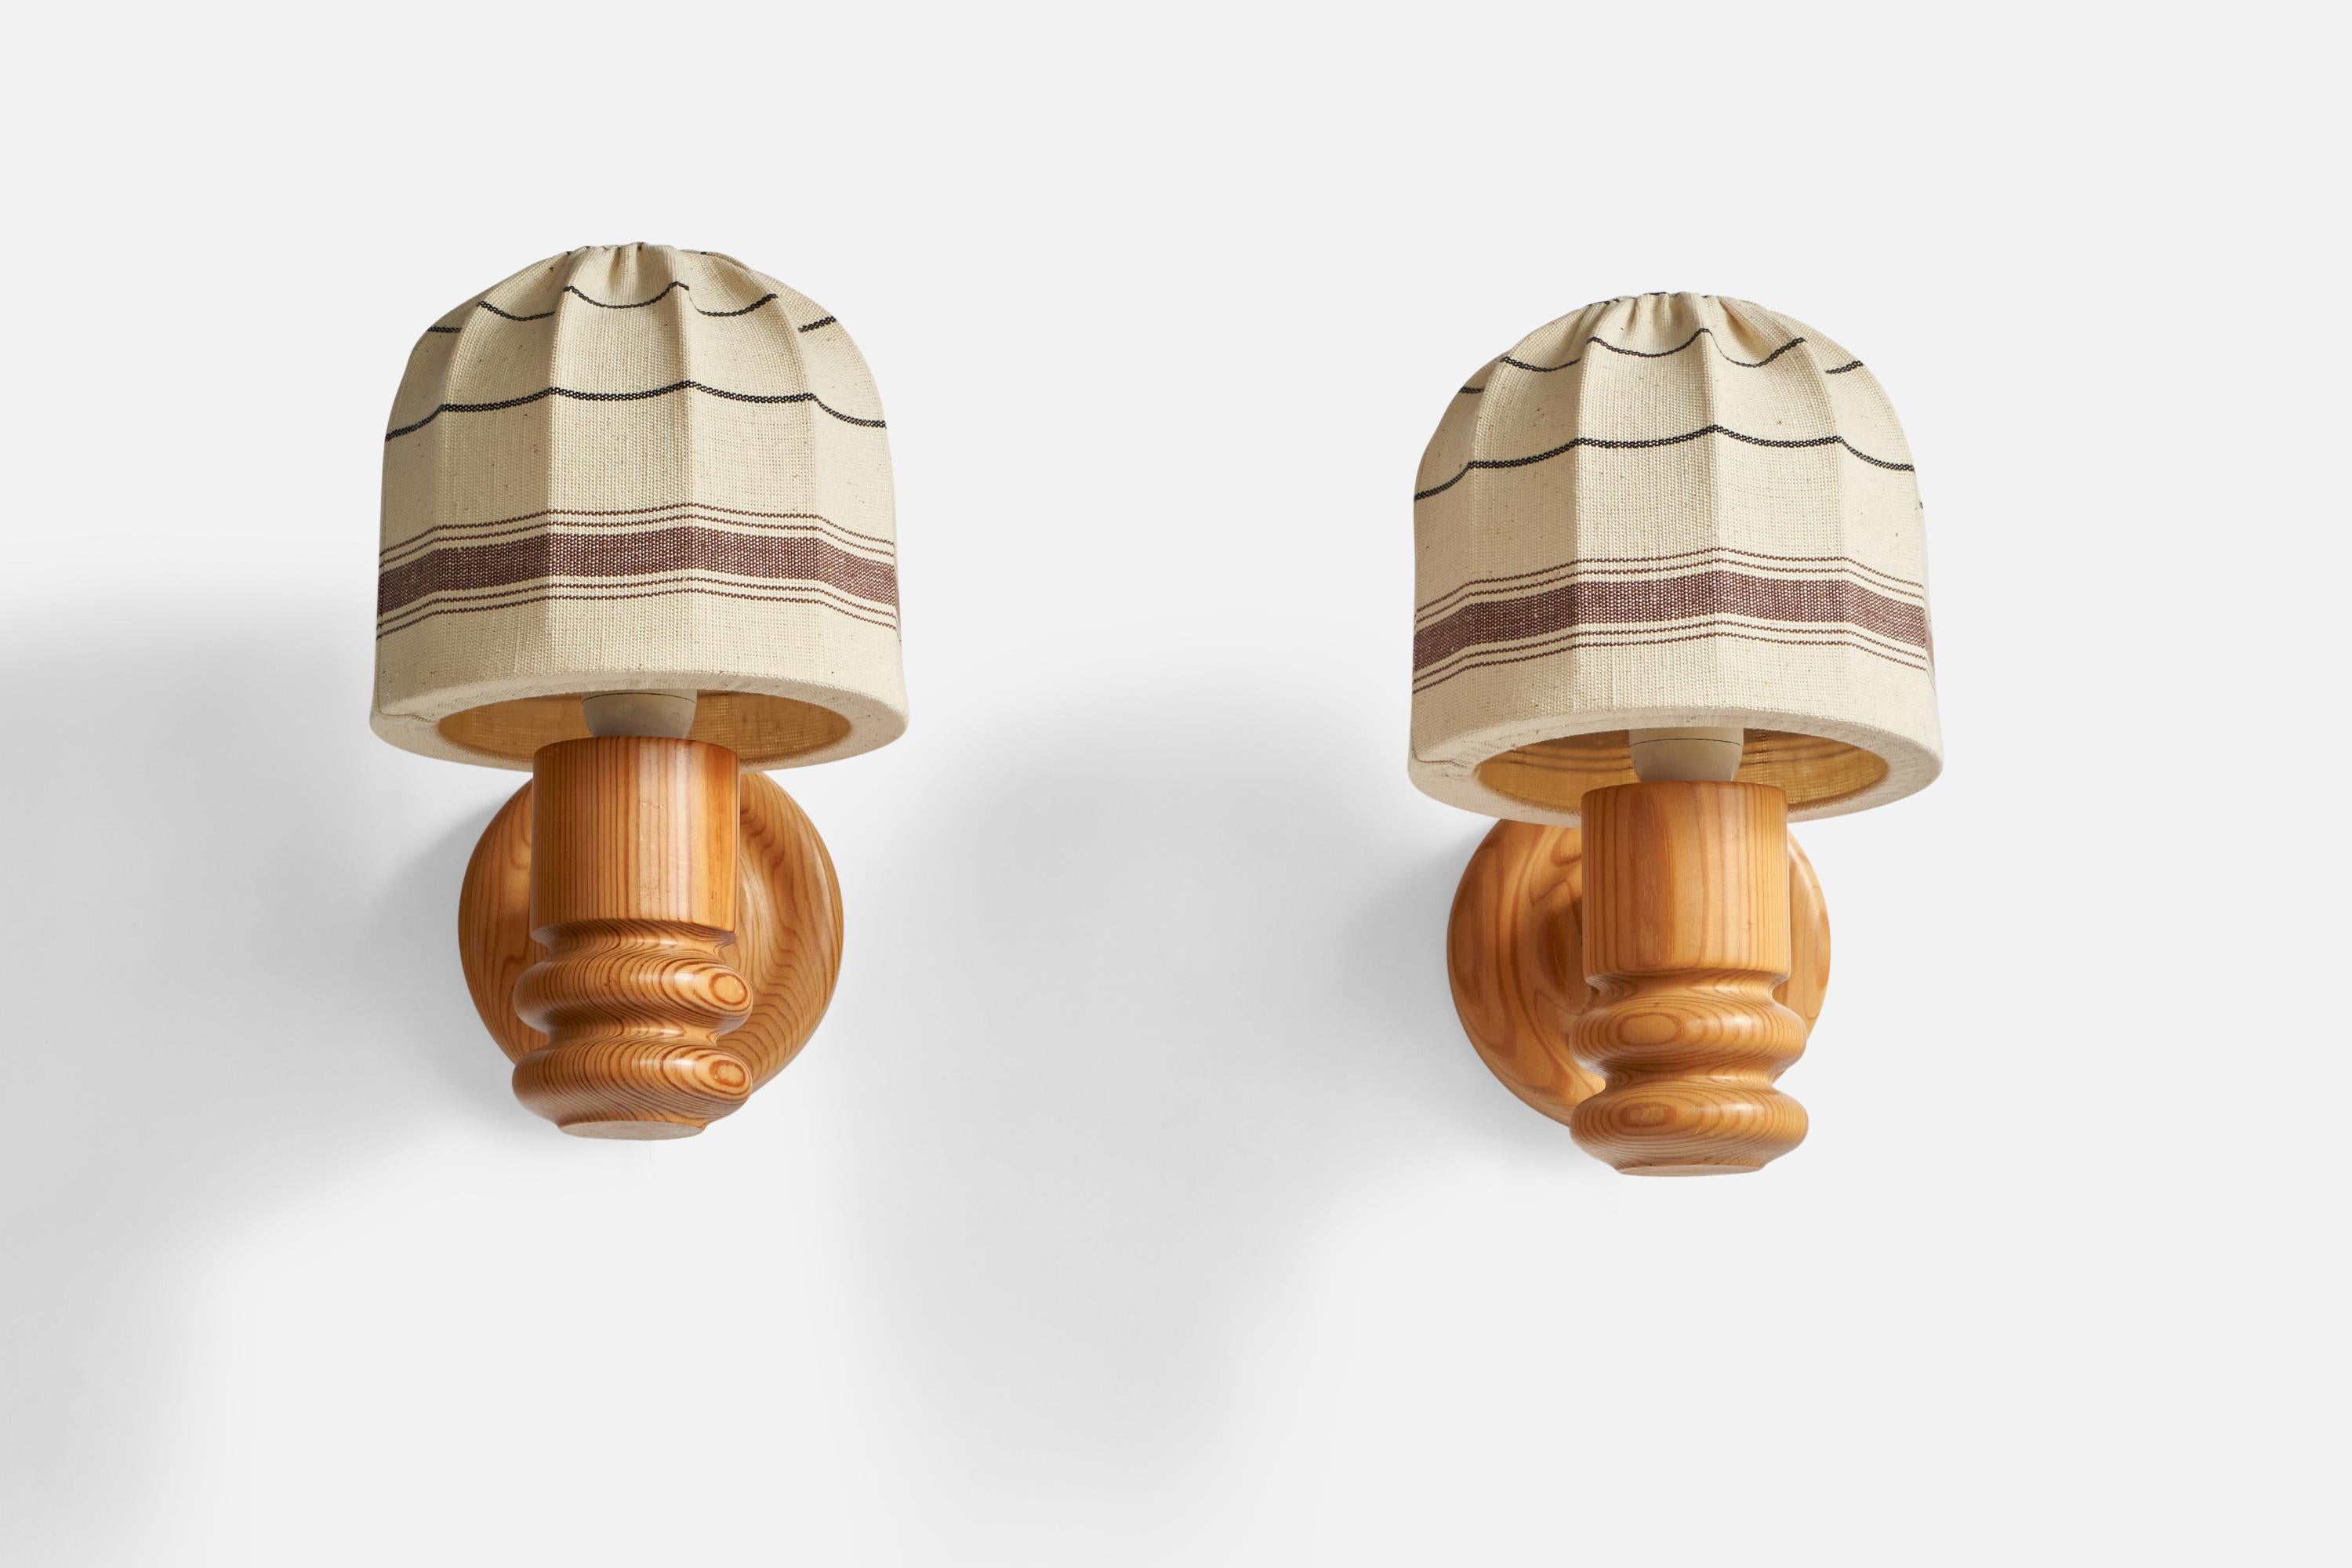 A pair of pine and off-white brown woven fabric wall lights designed and produced by Solbackens Svarveri, Sweden, 1970s.

Overall Dimensions (inches): 11.85” H x 7.05” W x 10.25” D
Back Plate Dimensions (inches): 5.35” Diameter x 1.15” Depth
Bulb